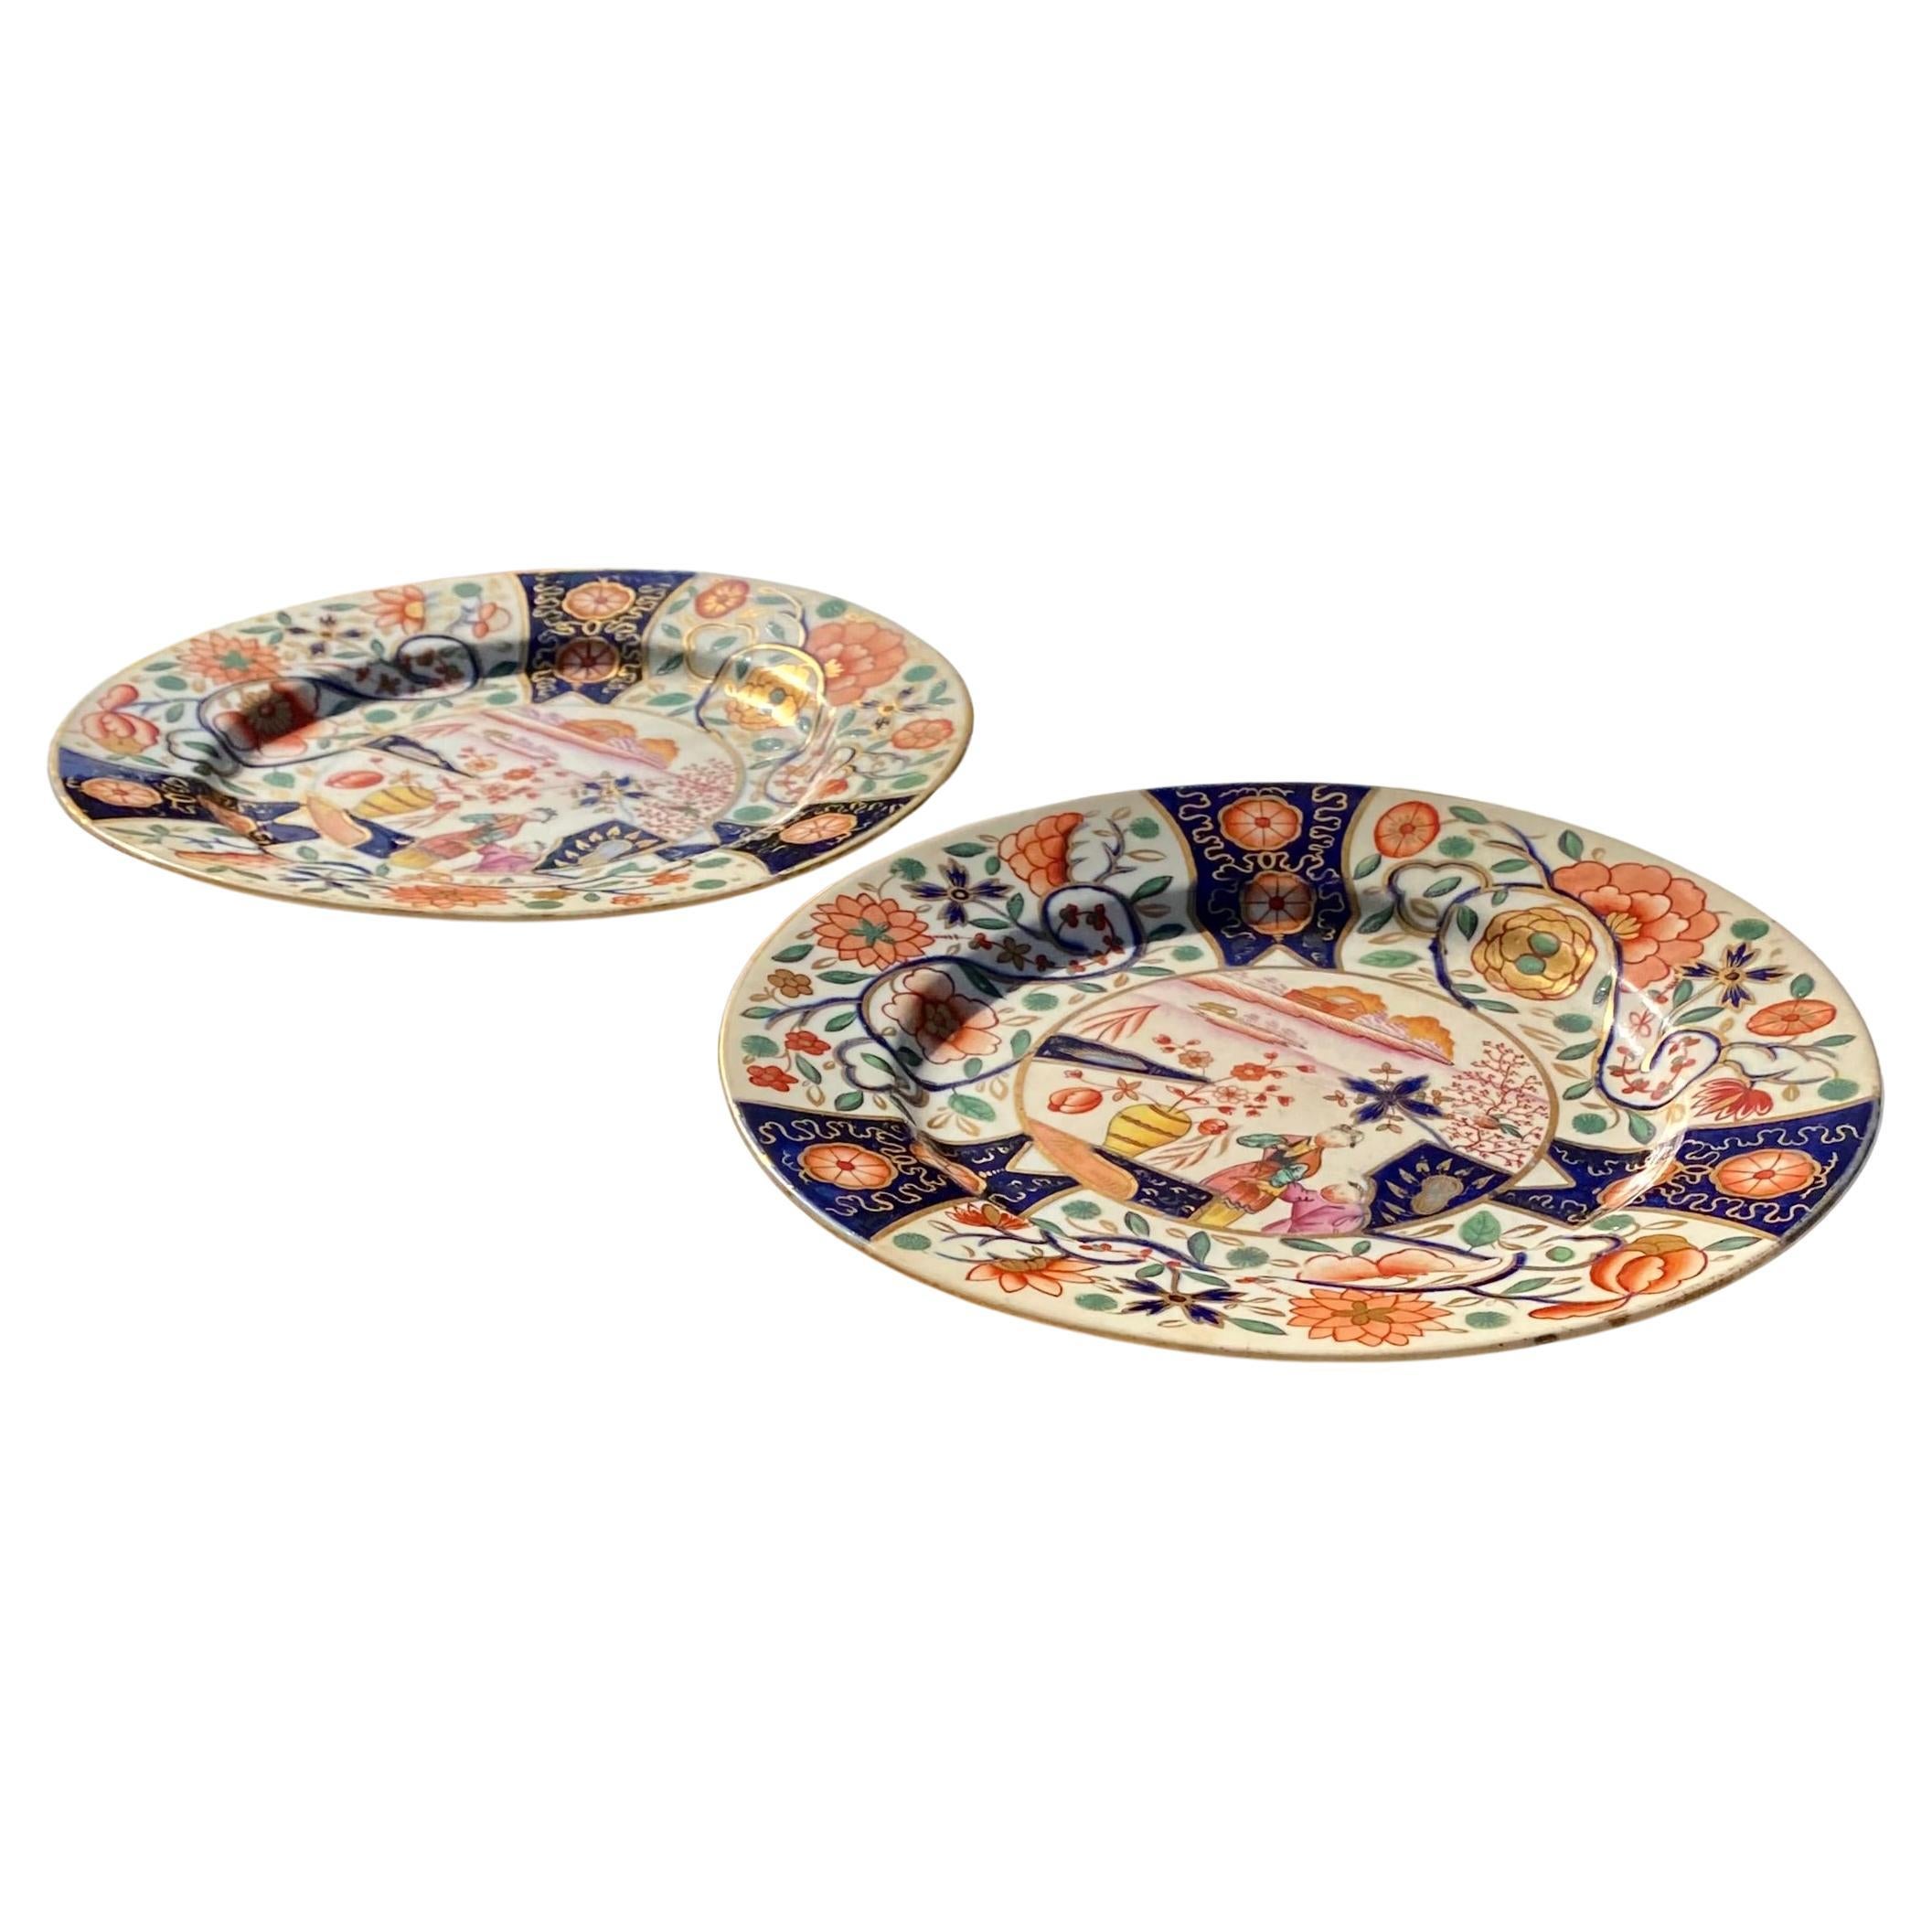 A fine pair of antique Chamberlains Worcester cabinet plates having a pleasing Asian design of figures in a garden and gorgeous Imari colors, circa 1810.
 
In 1783, Robert Chamberlain (c.1736–98), head of the decorating department for Dr John Wall